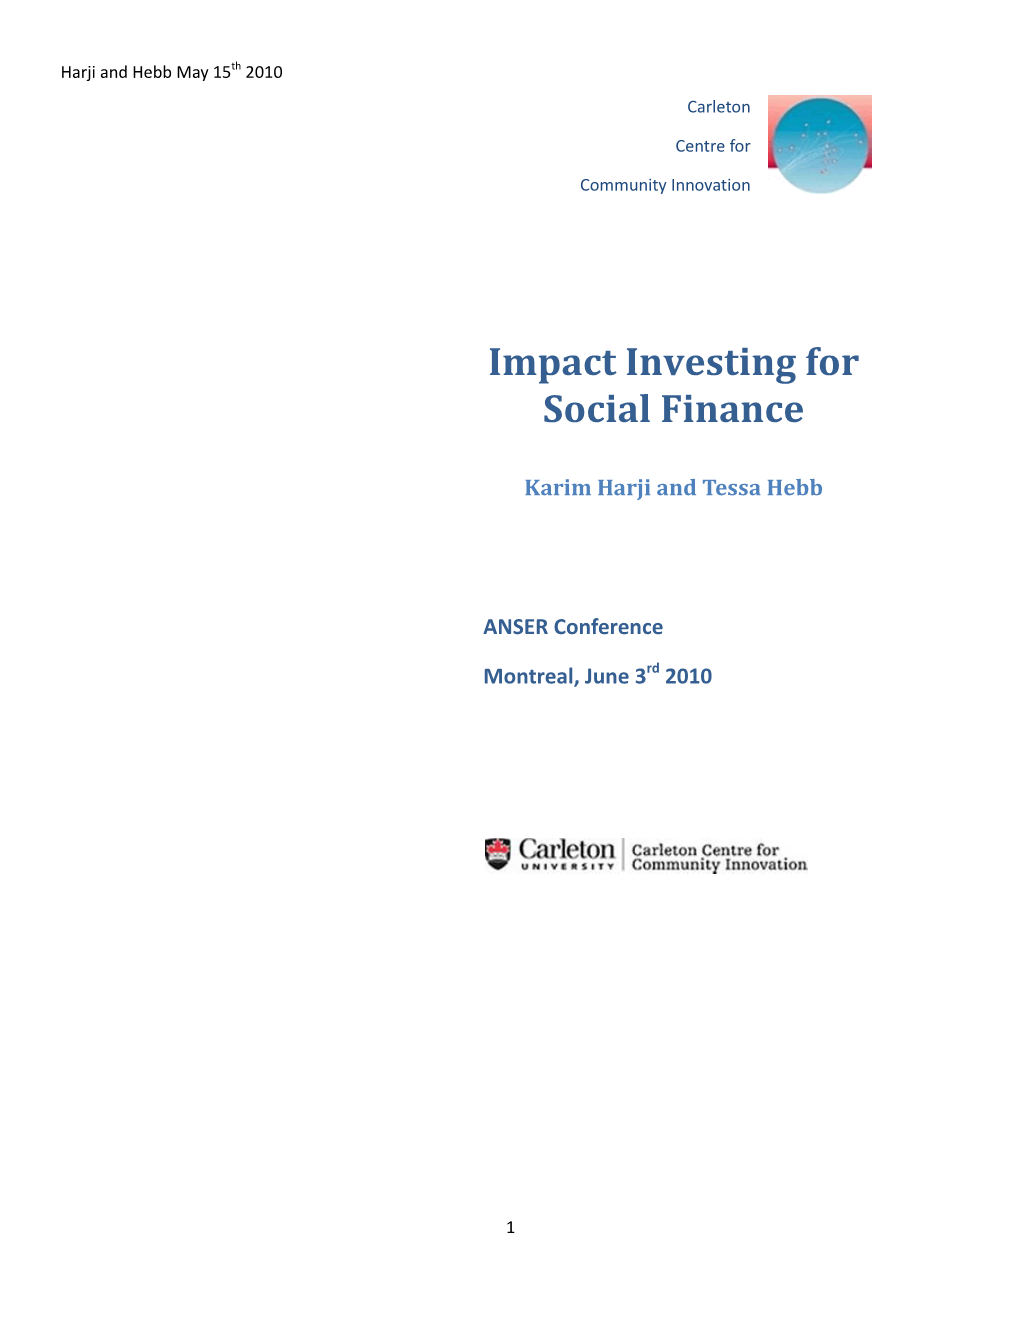 Impact Investing for Social Finance